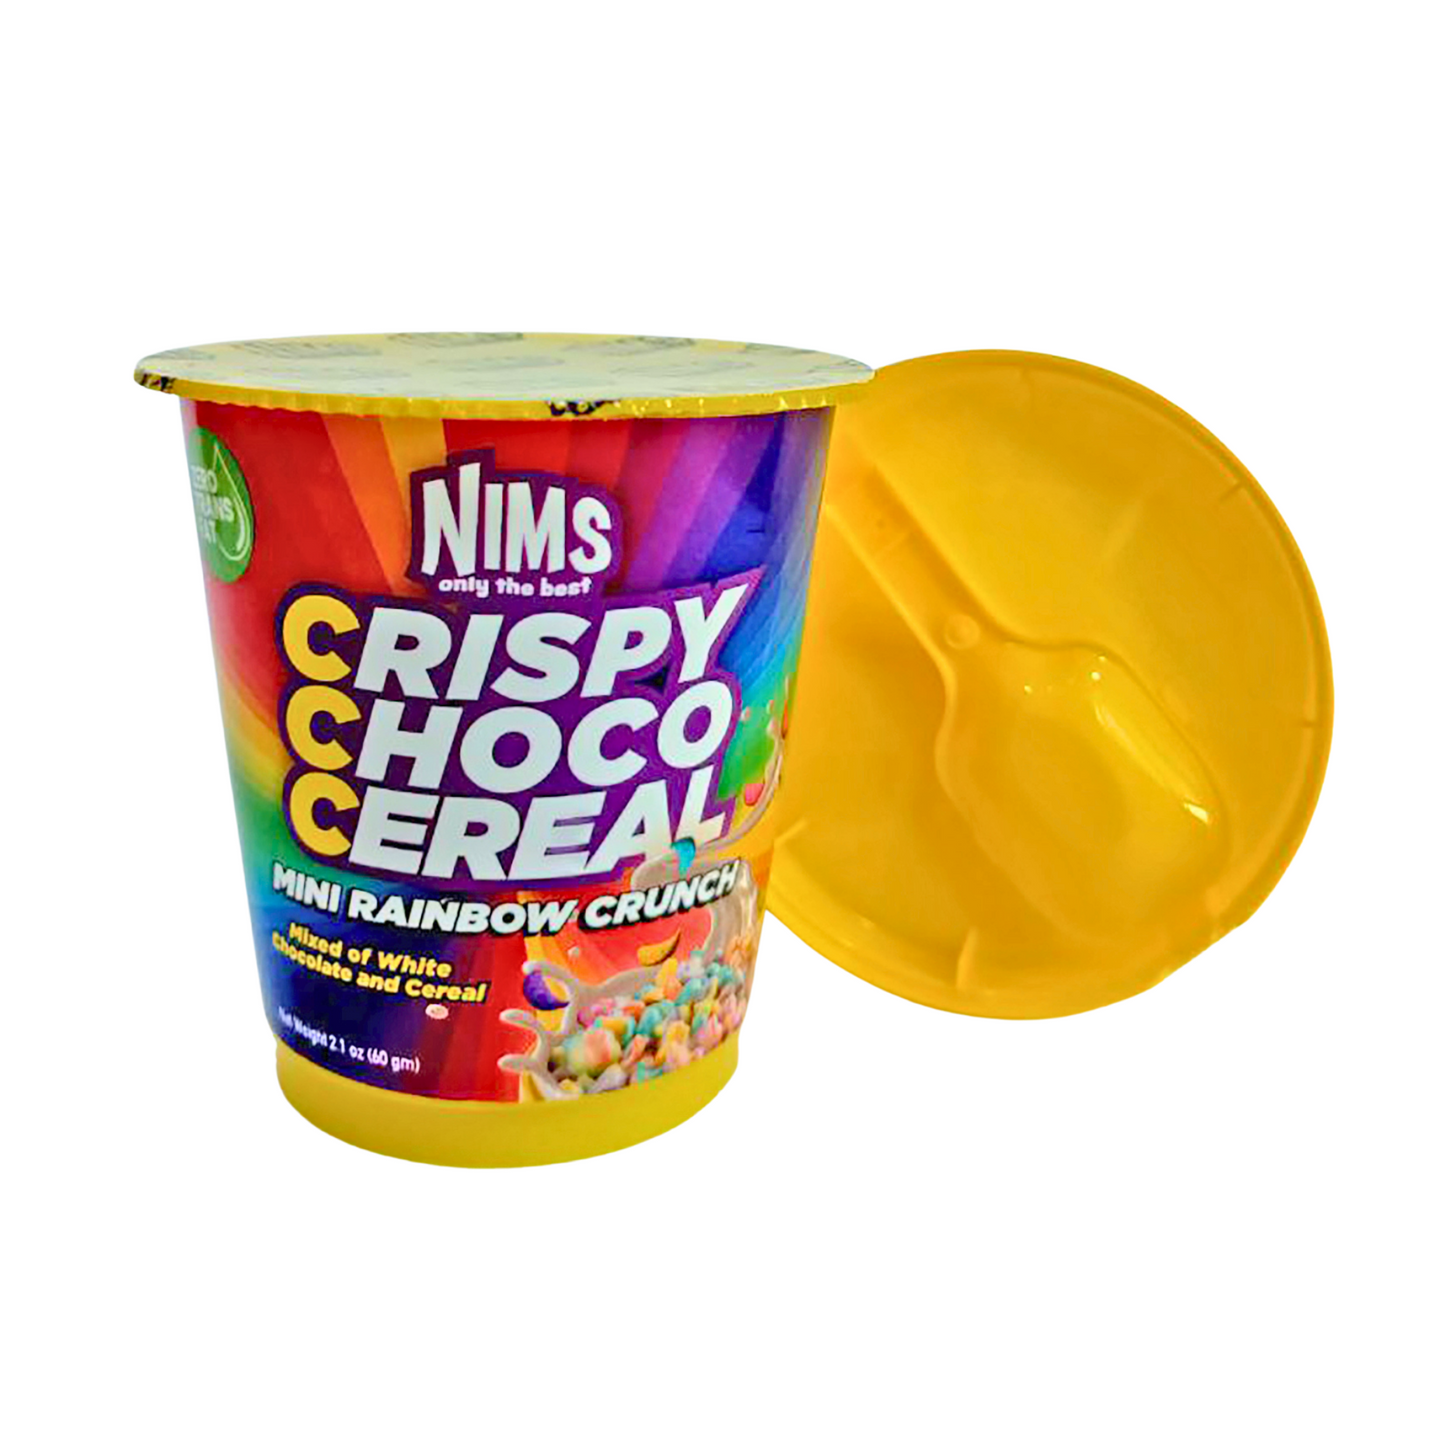 NIMS Crispy Choco Cereal, Mini Rainbow Crunch, Mixed of White Chocolate and Cereal, Ready to Eat, 2.1 oz (60 gm), a pack of 12